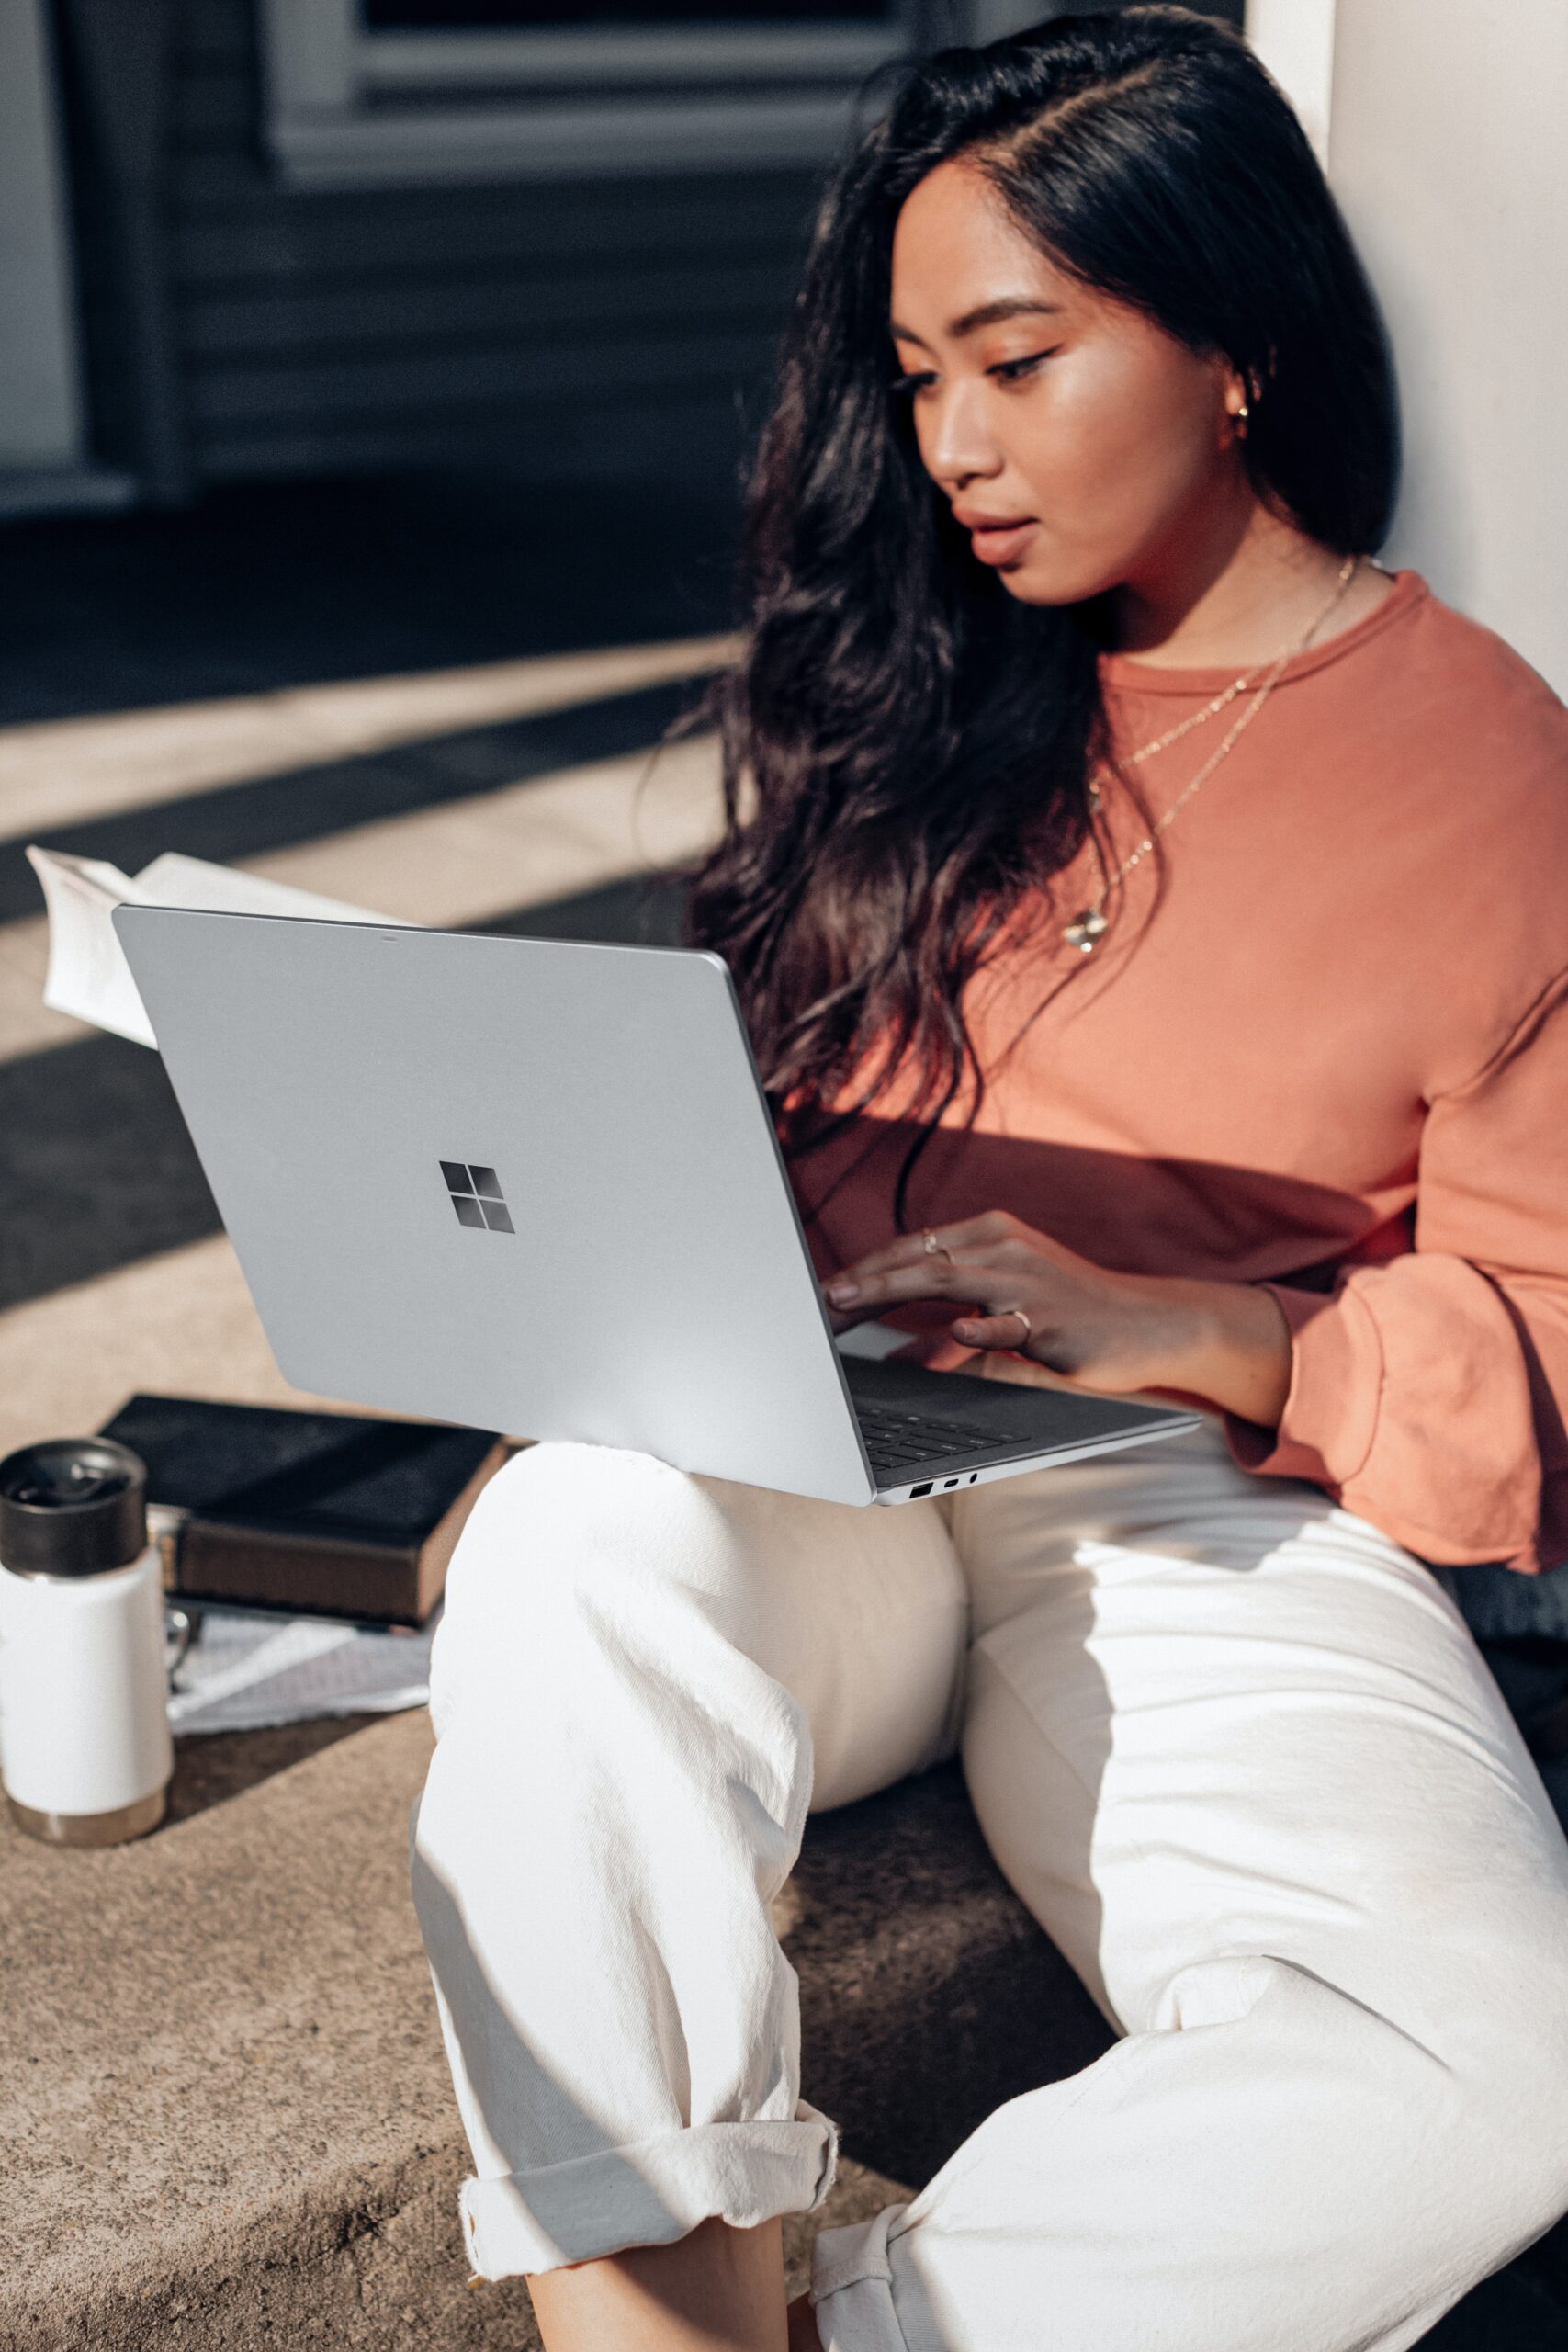 photo of woman studying on laptop